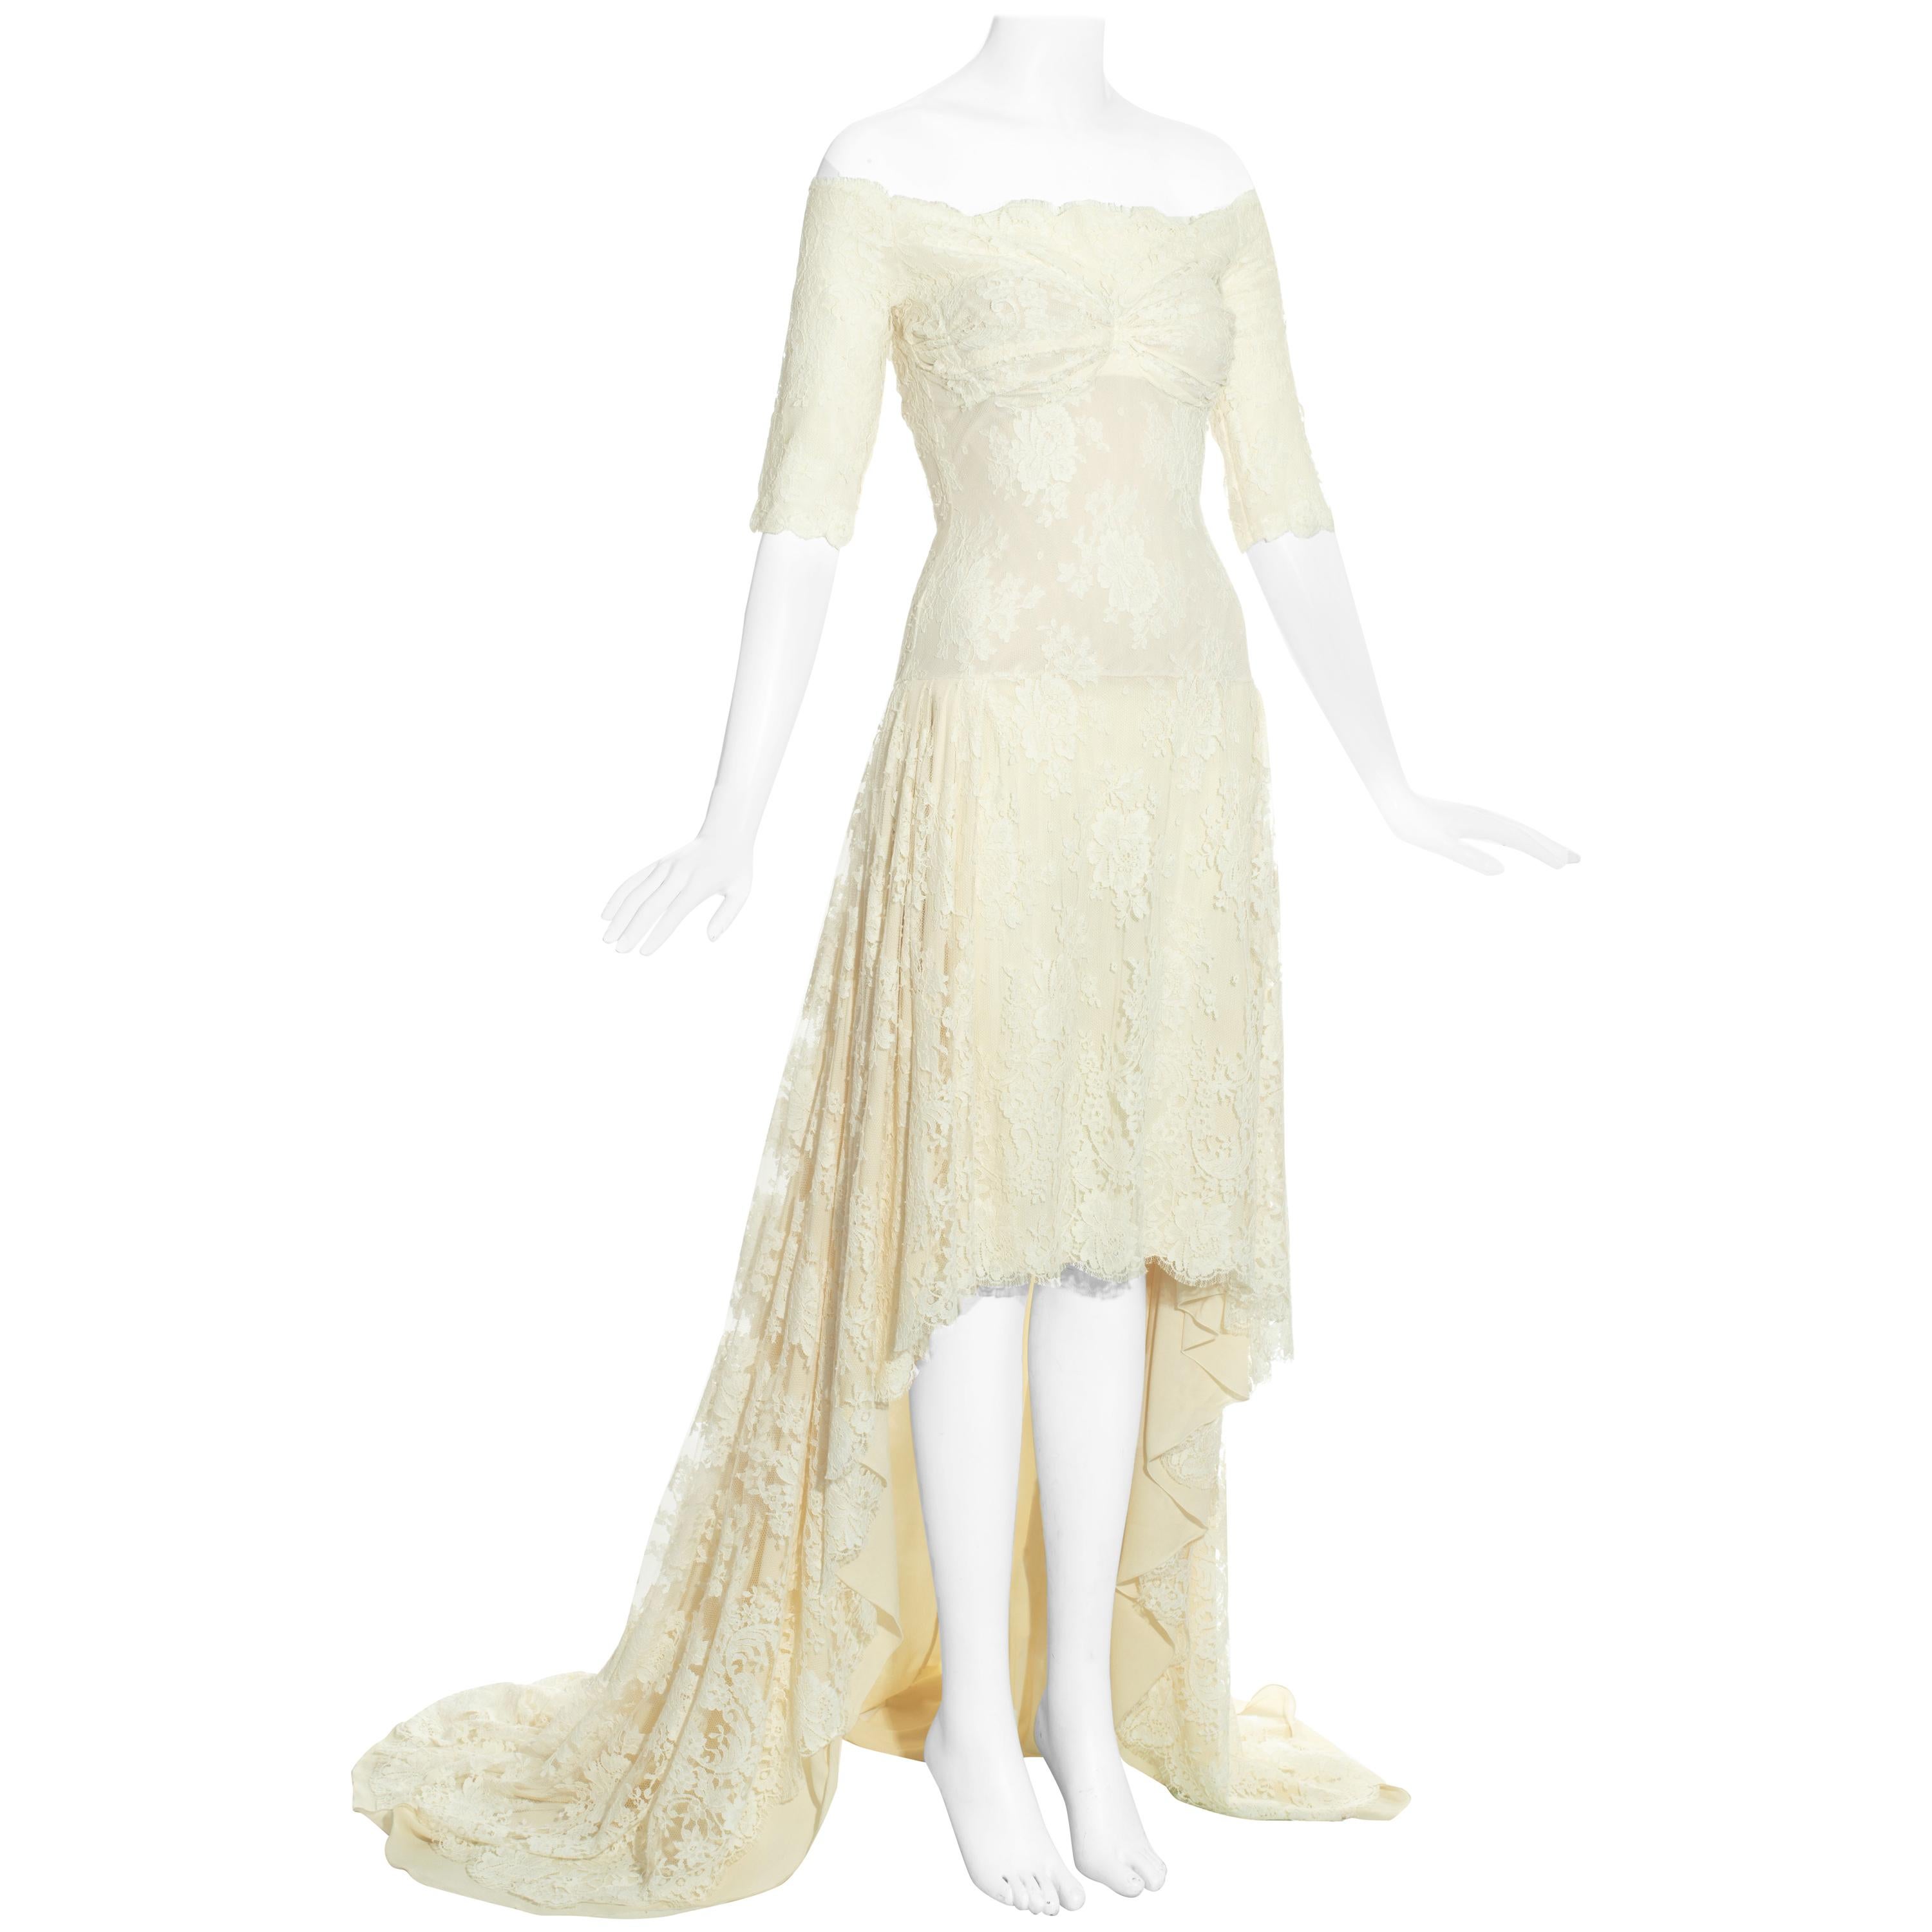 Alexander McQueen ivory lace corseted trained evening dress, 'Sarabande' ss 2007